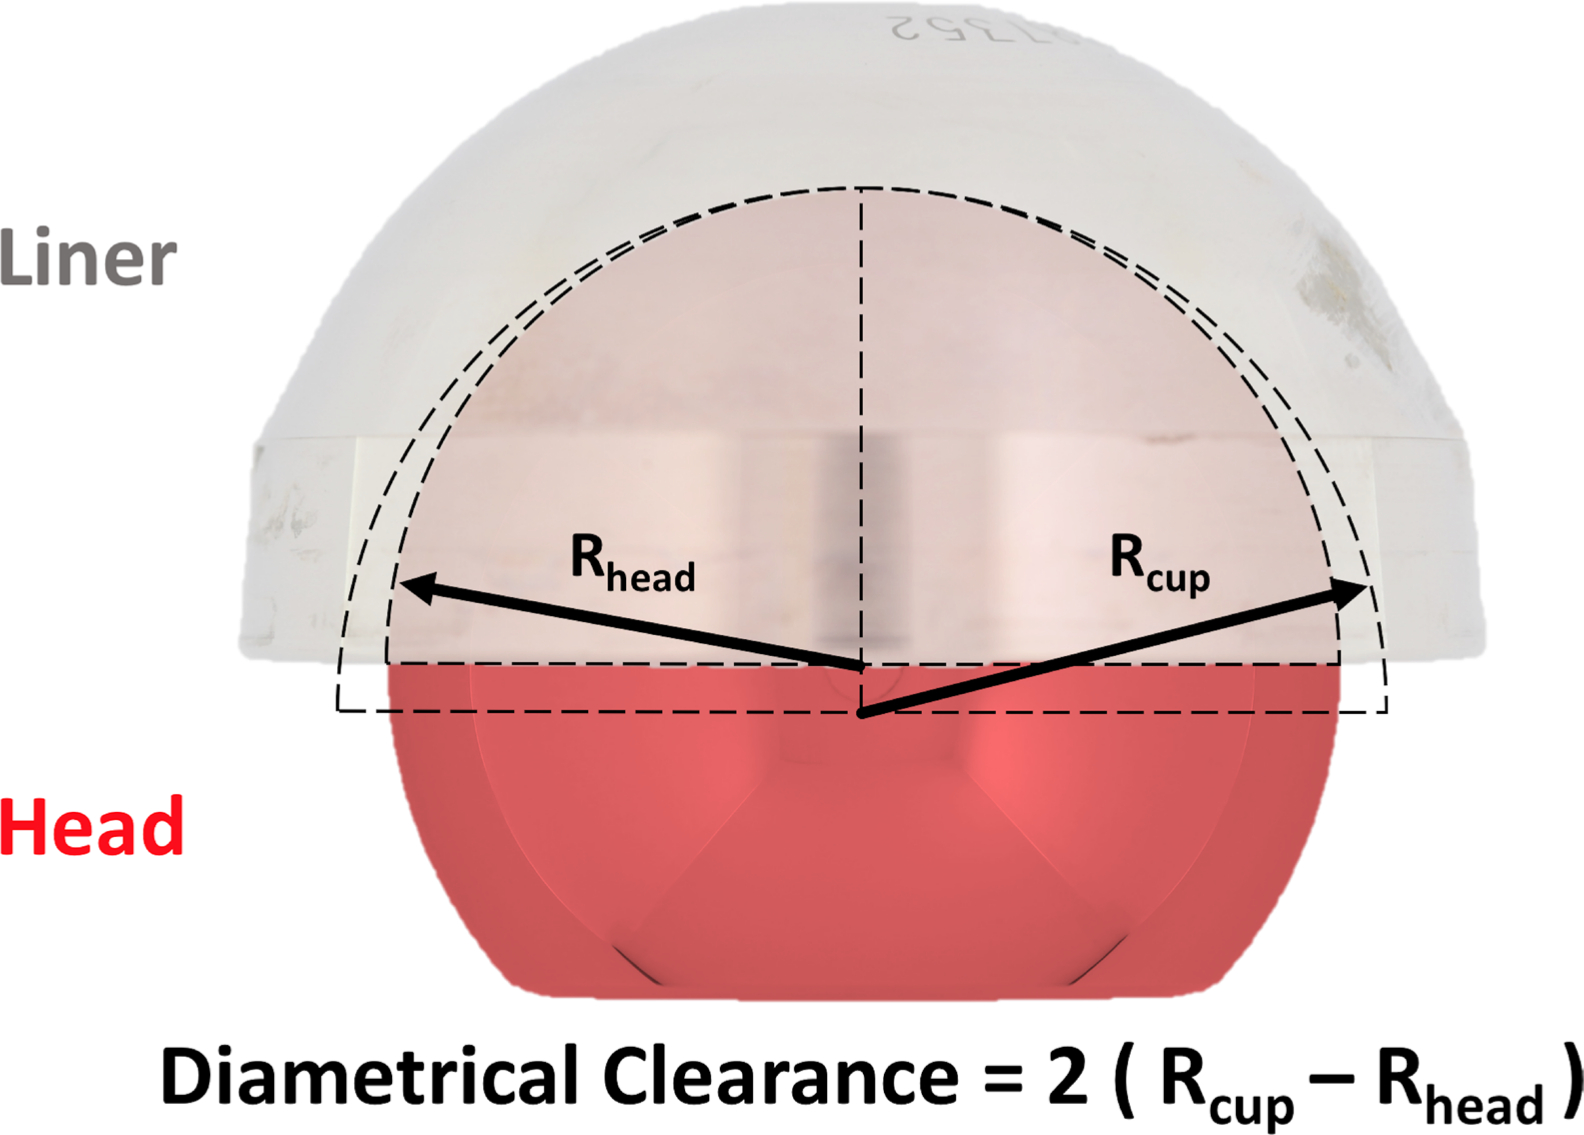 Fig. 4 
            Diametrical clearance between a head and liner component of a hip arthroplasty.
          